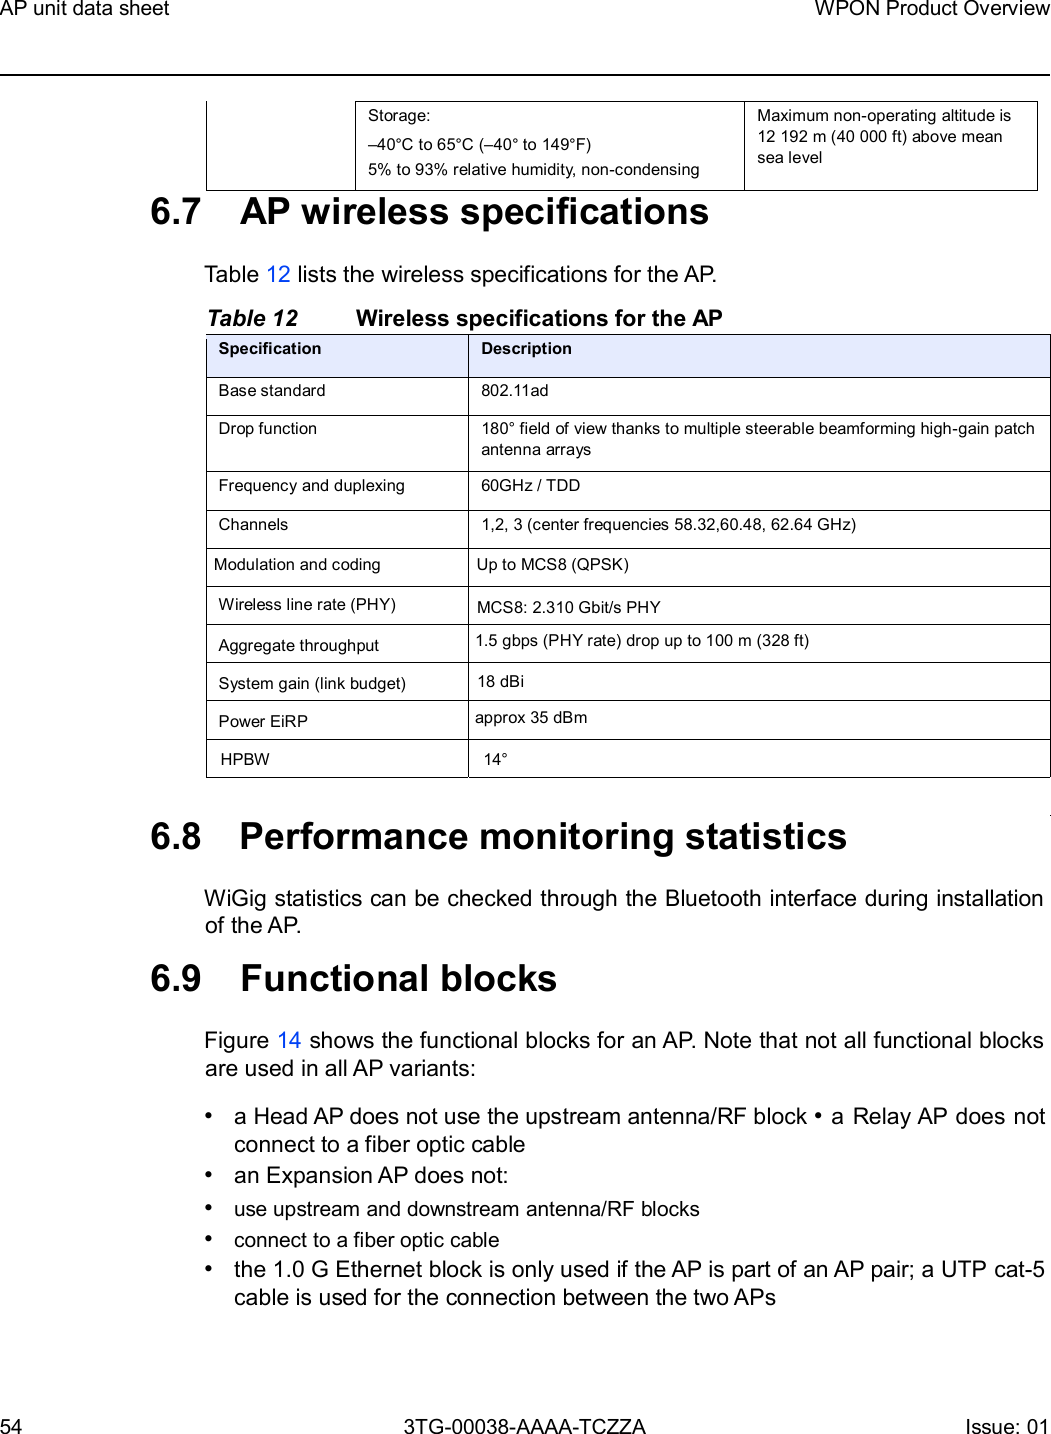 Page 54 of Nokia Bell 7577WPONAPAC WPON User Manual WPON Product Overview